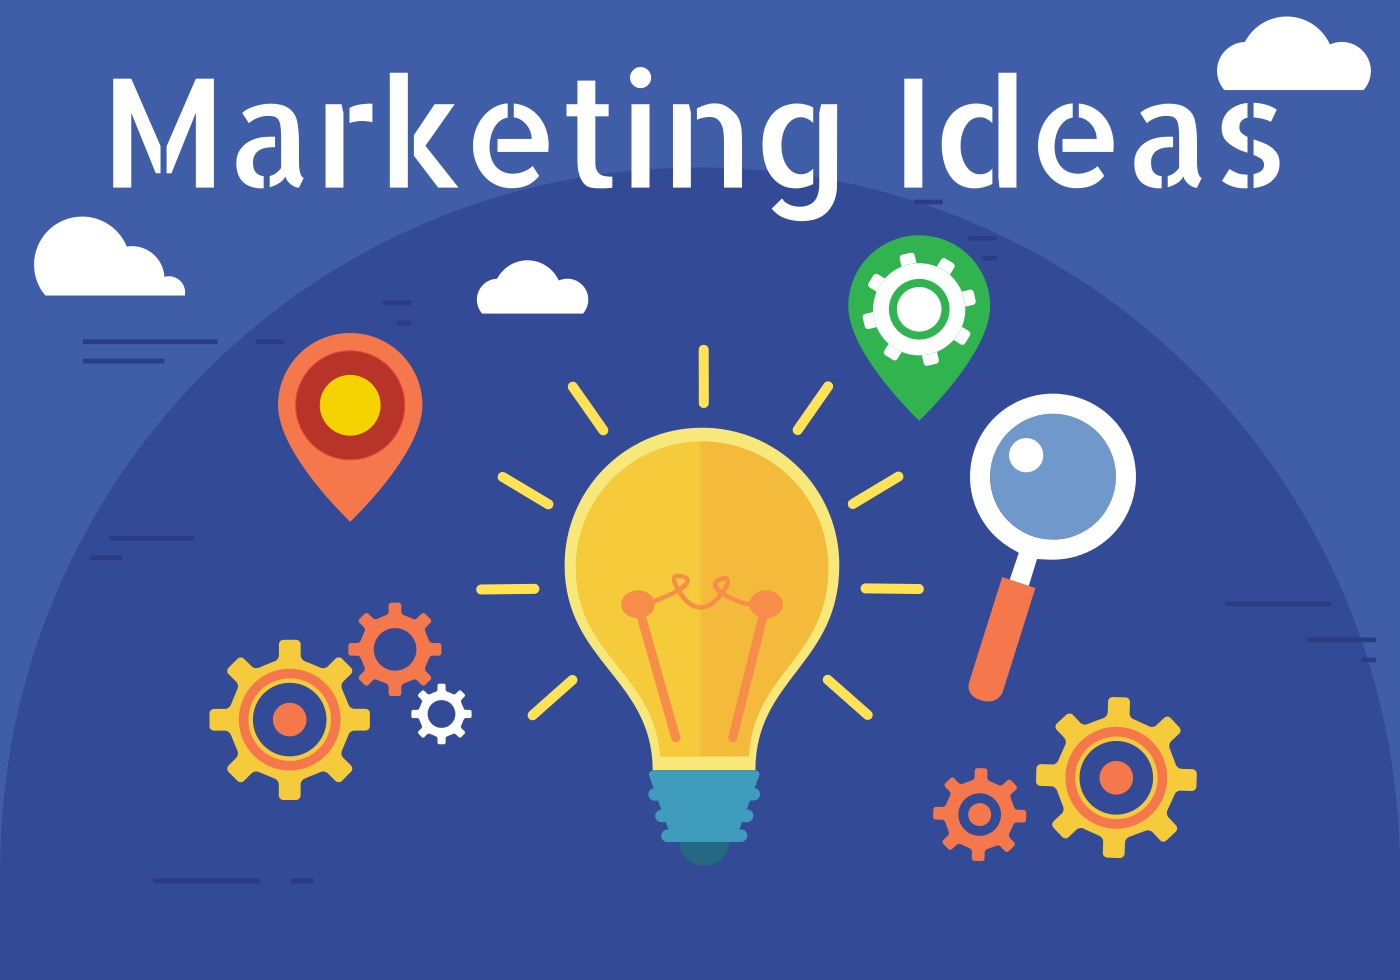 Marketing Business Ideas are all about individuals creating, funding, and implementing solutions to social, cultural, and environmental crises.